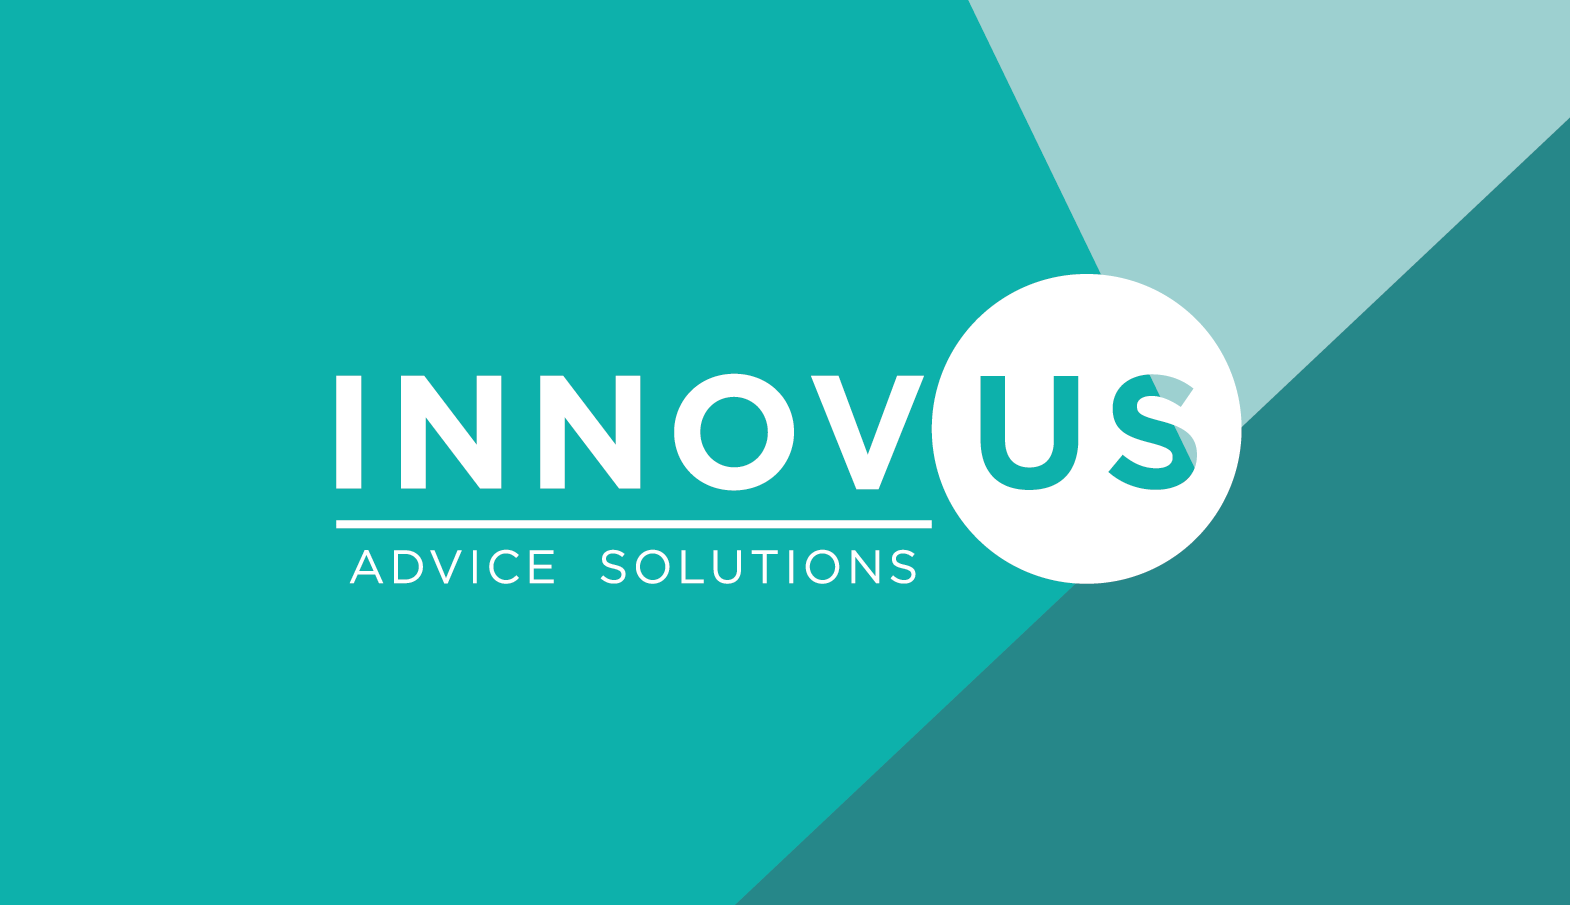 Innovus advice wollongong illawarra financial planner financial adviser corporate accountant auditor paul wright best financial planner in wollongong